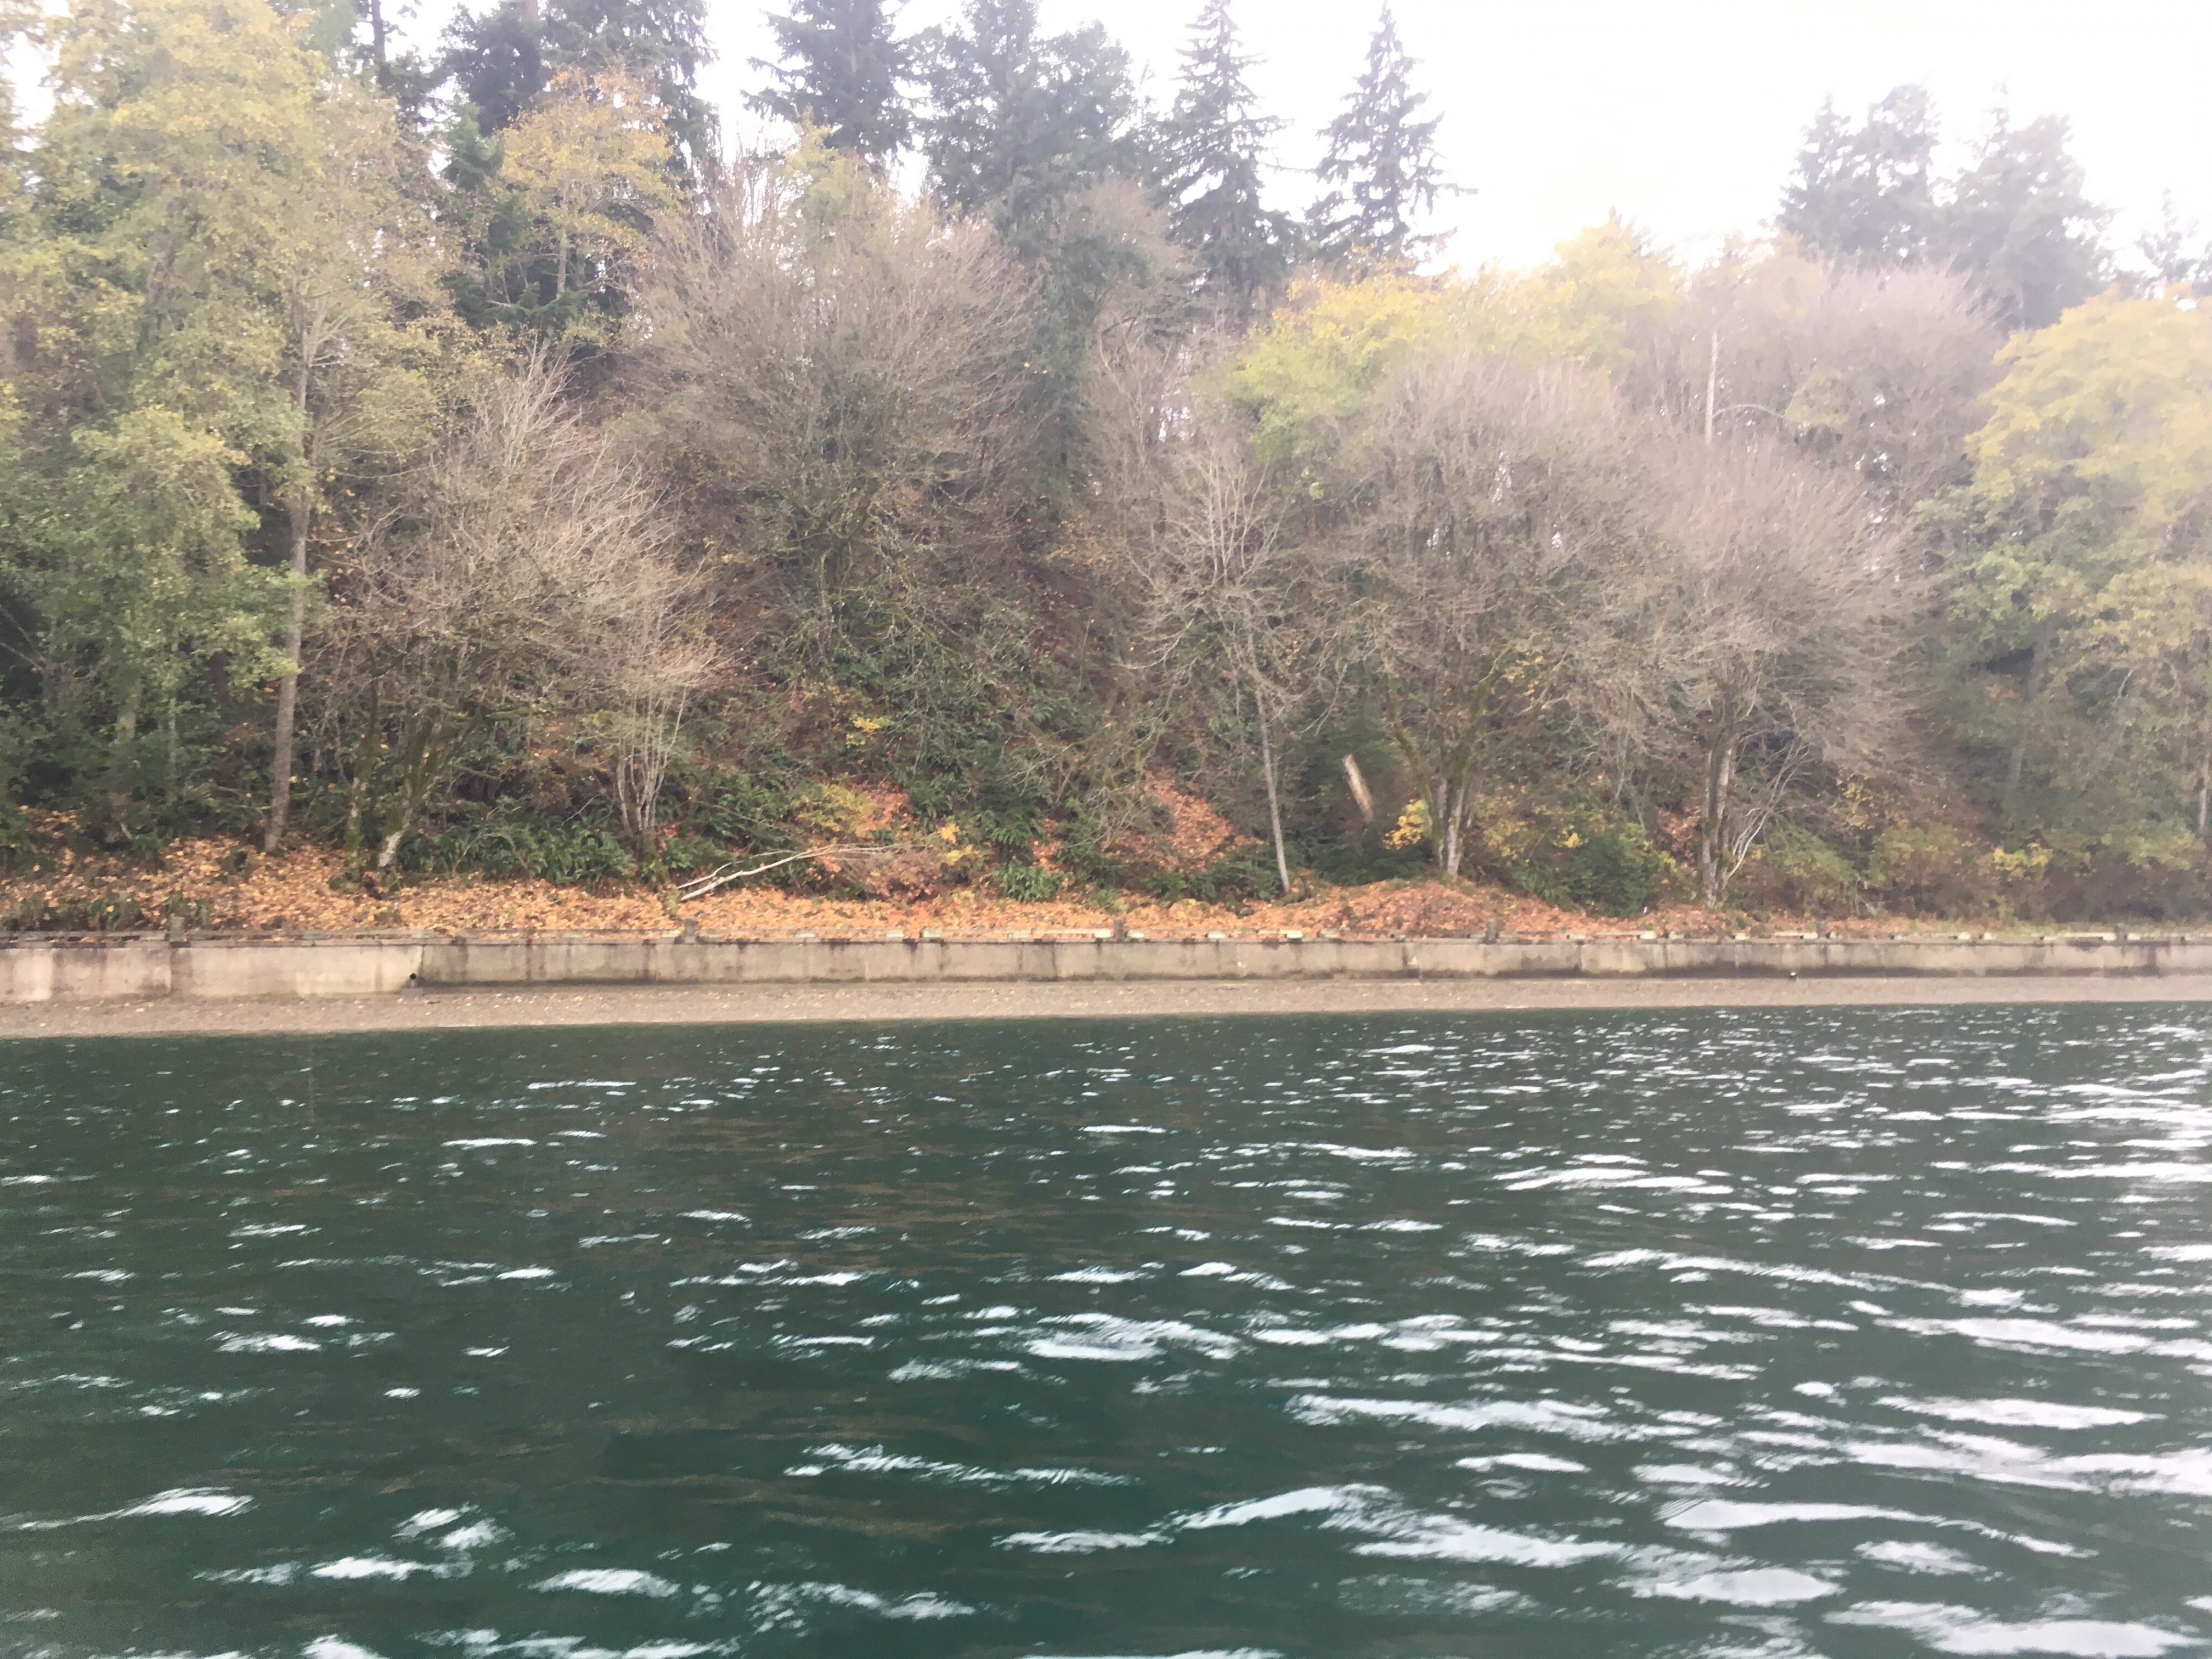 Autumn leaves on the hillside above the Owen Beach Promenade as viewed from the water #OptOutside